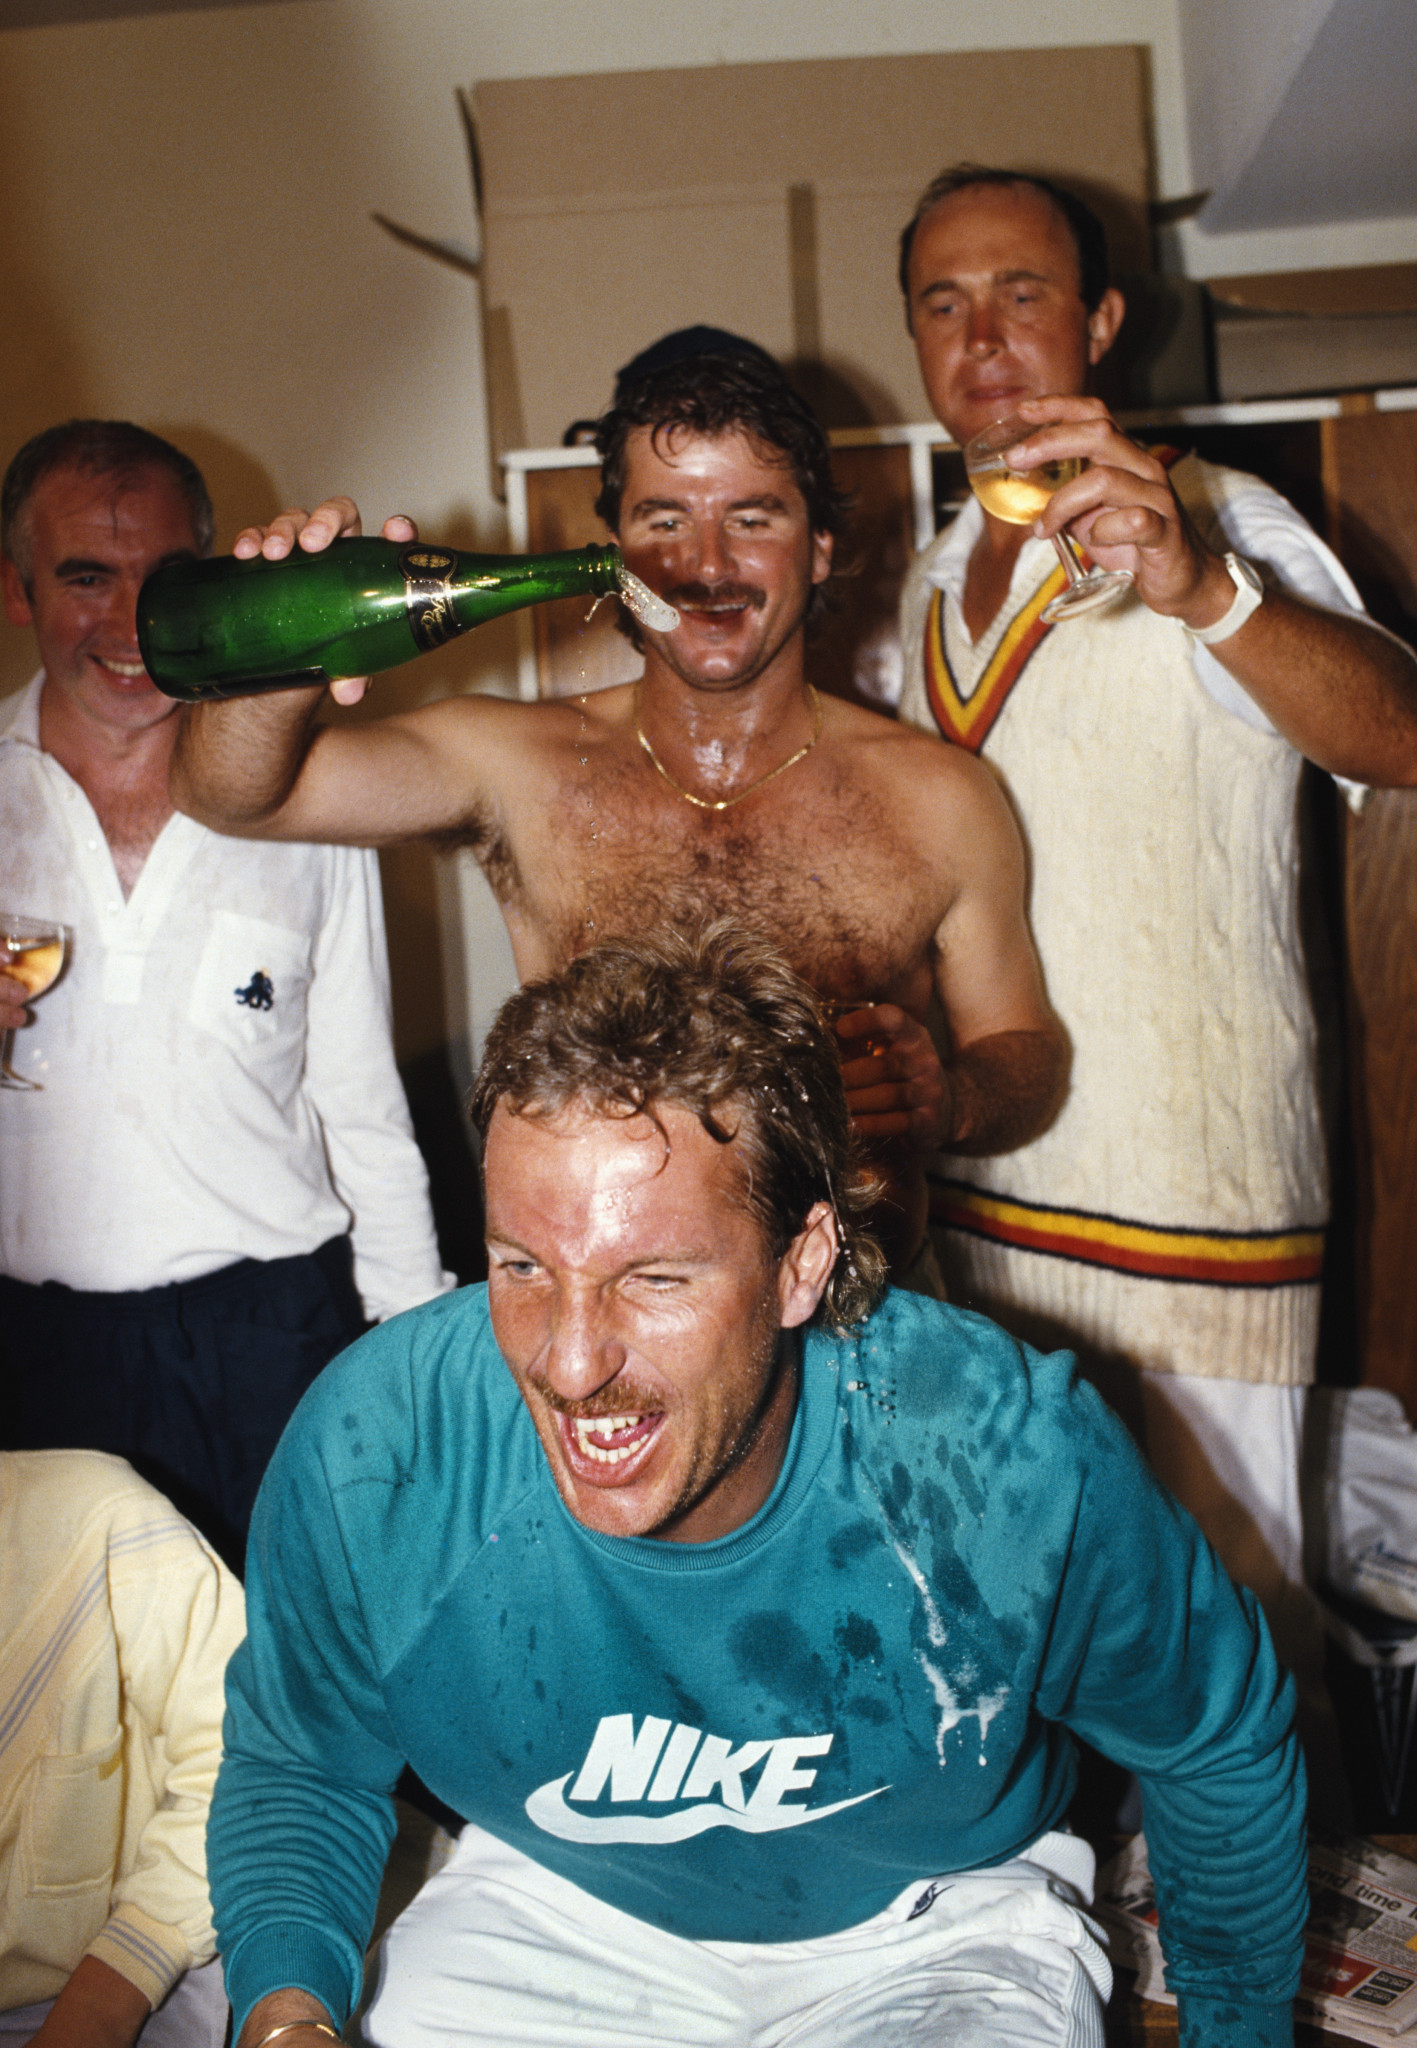 Ian Botham, front centre, and Allan Lamb, top centre, were partners in crime in terms of practical jokes as well as cricketers for England ©Getty Images